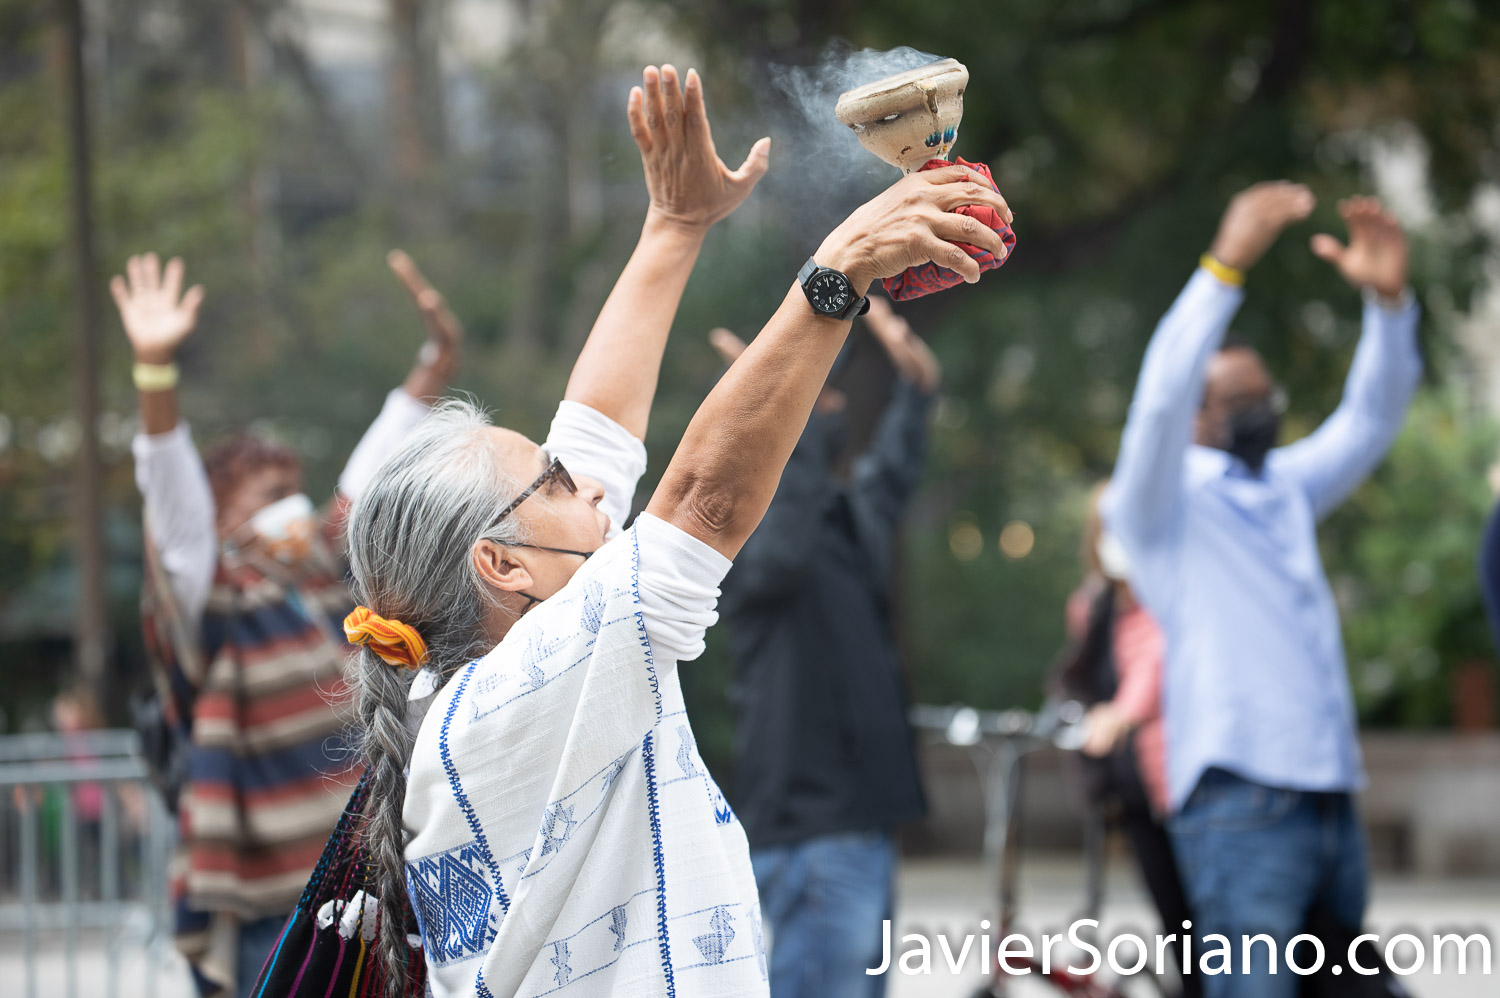 Sunday, October 11, 2020. Manhattan, New York City - 13th Annual Indigenous Day of Remembrance. Instead of celebrating Día de la Raza or Columbus Day, we celebrate Indigenous Peoples’ Day. Photo by Javier Soriano/www.JavierSoriano.com